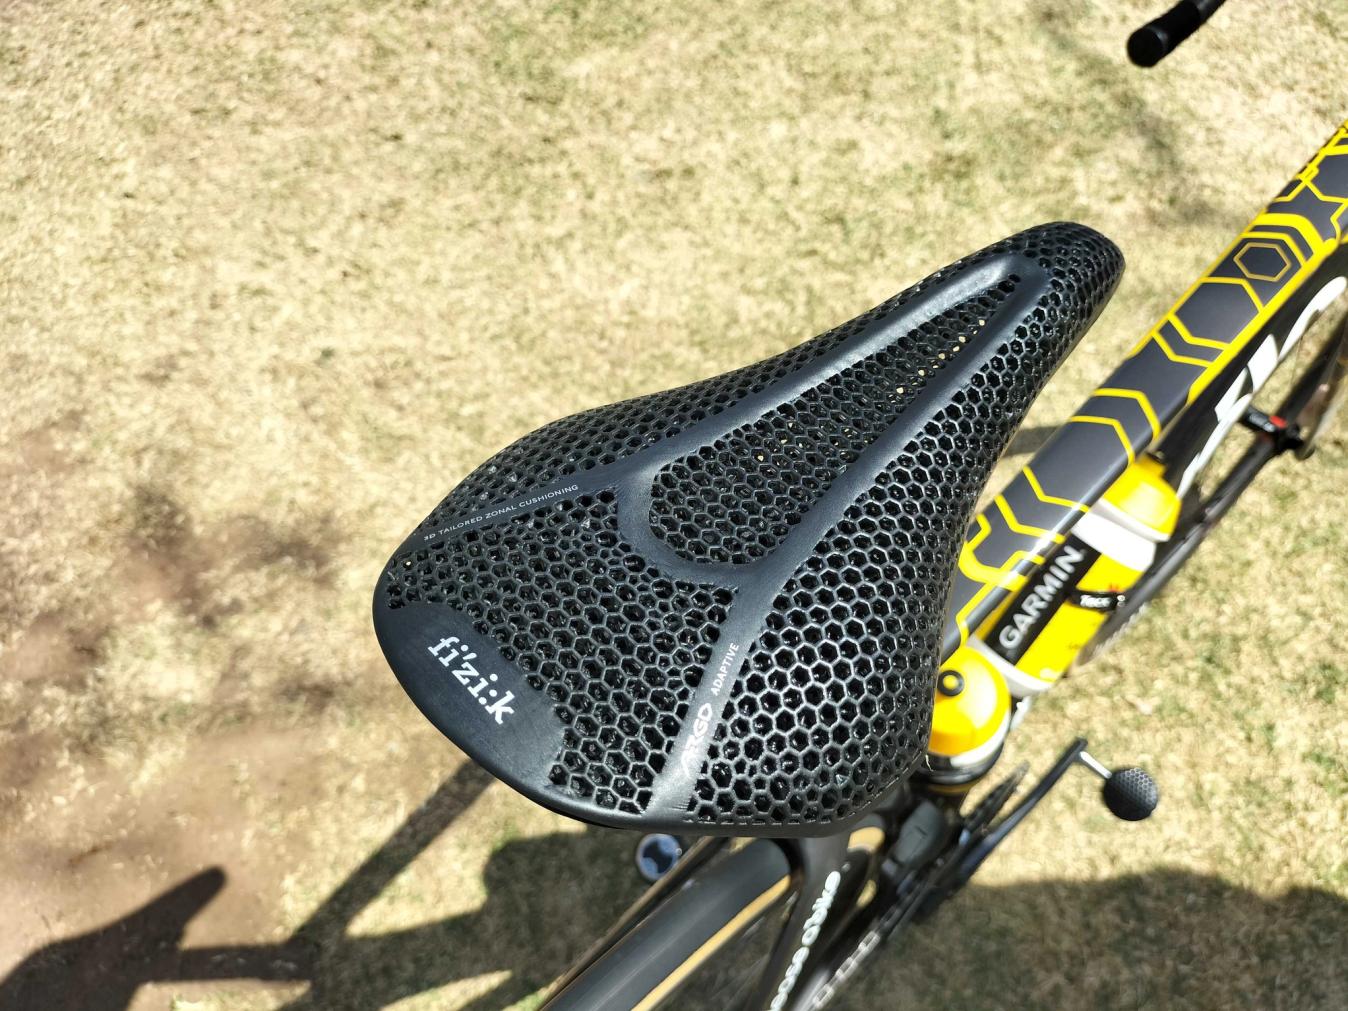 The Fizik Argo is a 3D-printed saddle